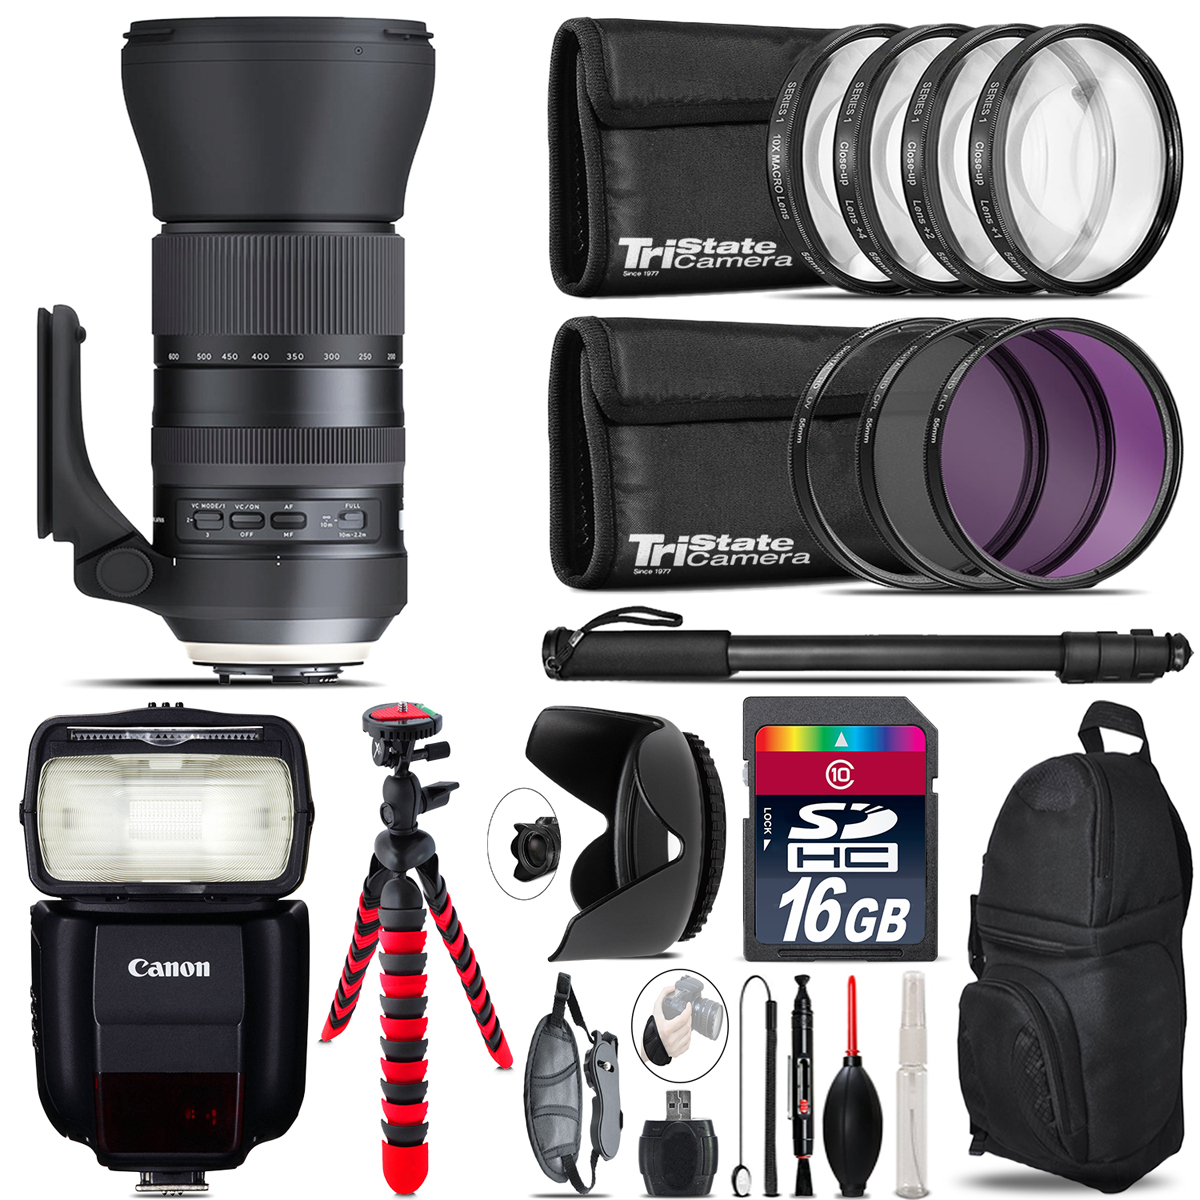 Tamron 150-600mm G2 for Canon + Speedlite 430EX III-RT & More - 16GB Kit *FREE SHIPPING*